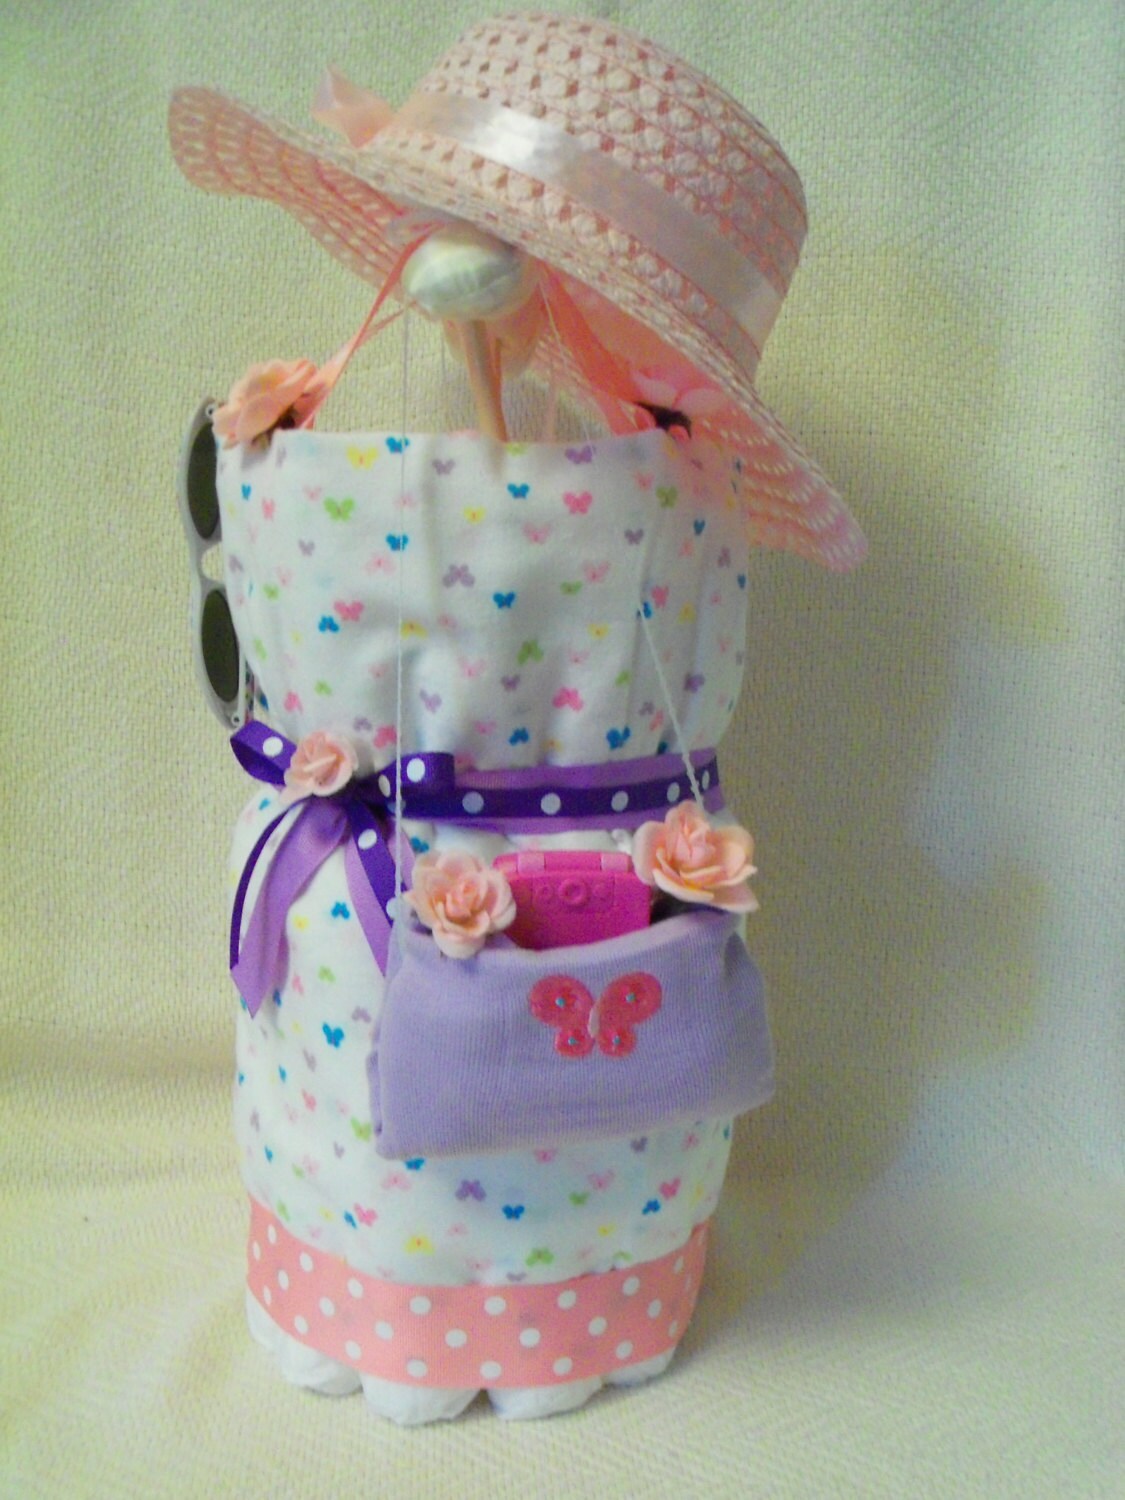 Baby Girl Diaper Dress an adorable baby shower gift made to